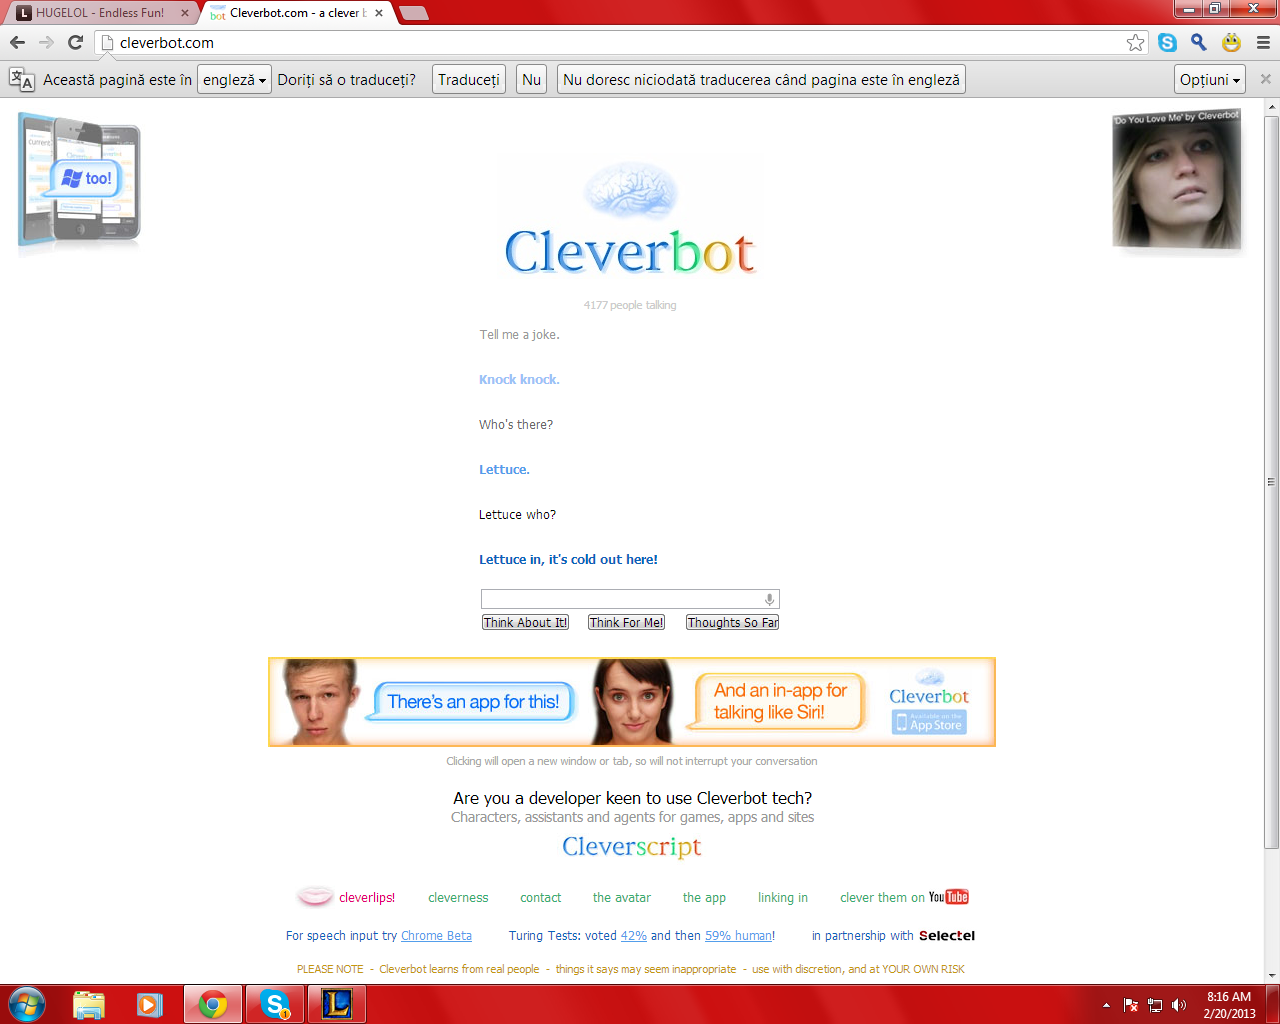 Cleverbot strikes again